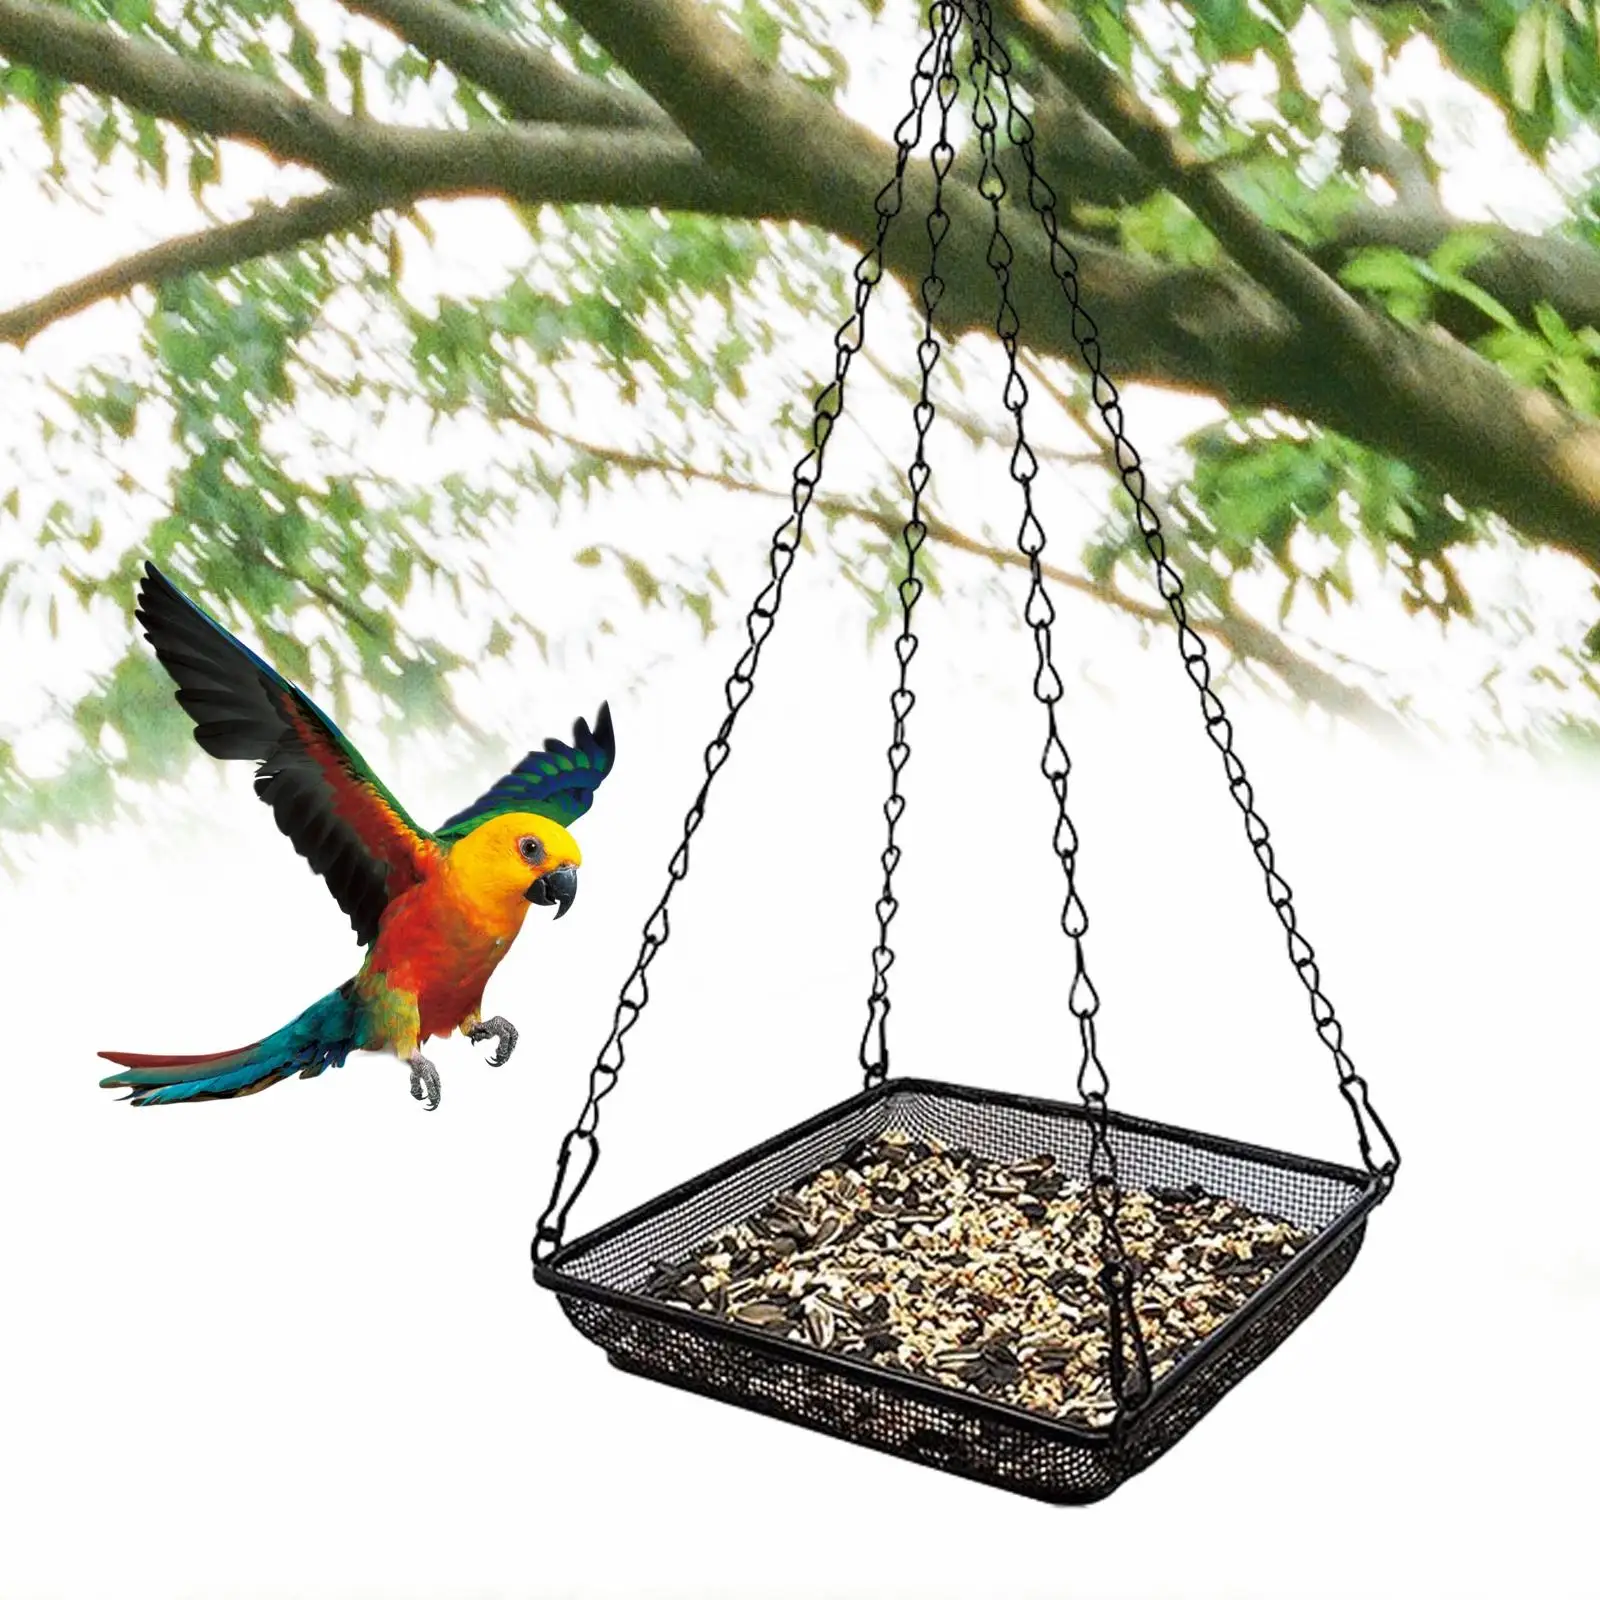 Hanging Bird Feeder Tray Durable Chains Metal Mesh Platform for Outdoors